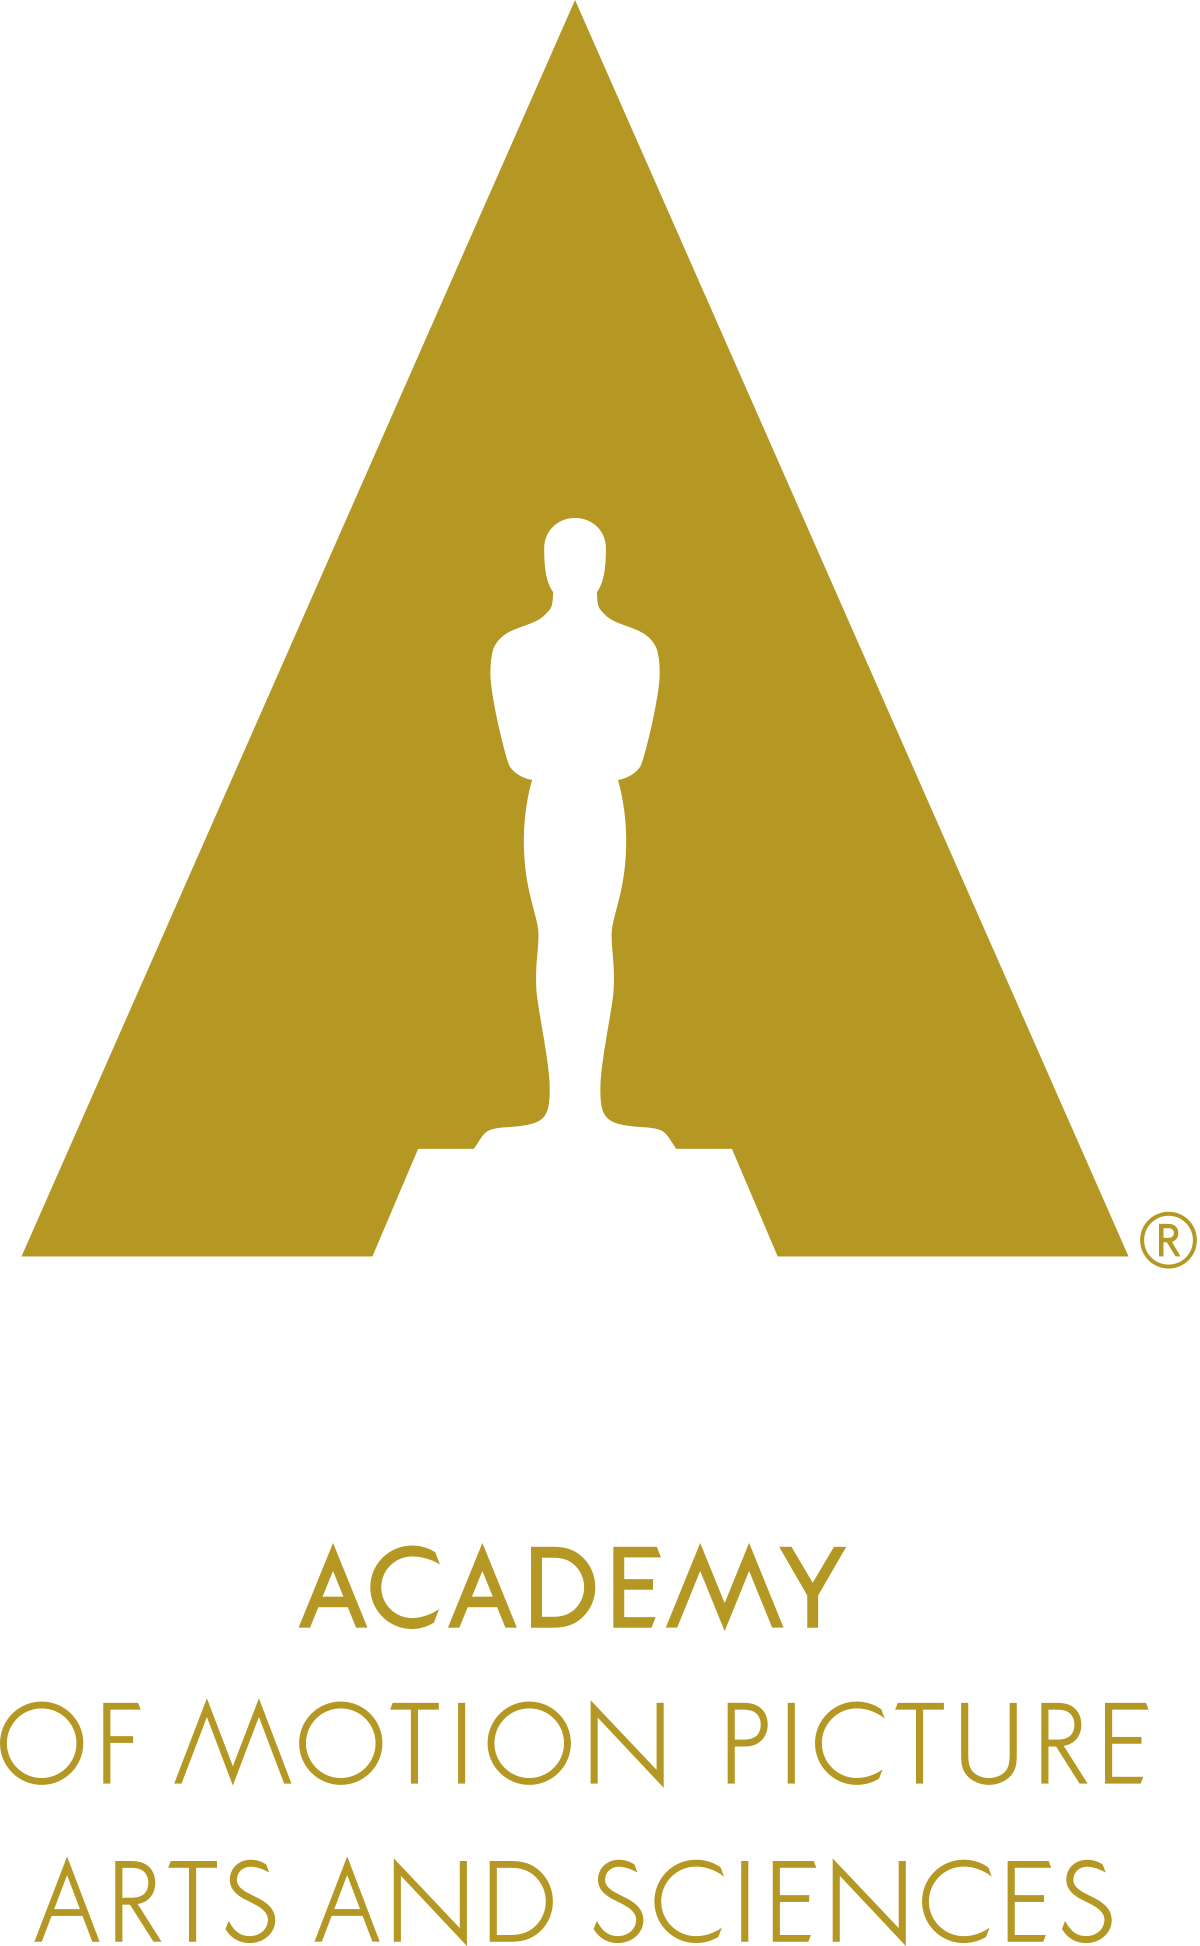 Academy_of_Motion_Picture_Arts_and_Sciences_logo.svg.png